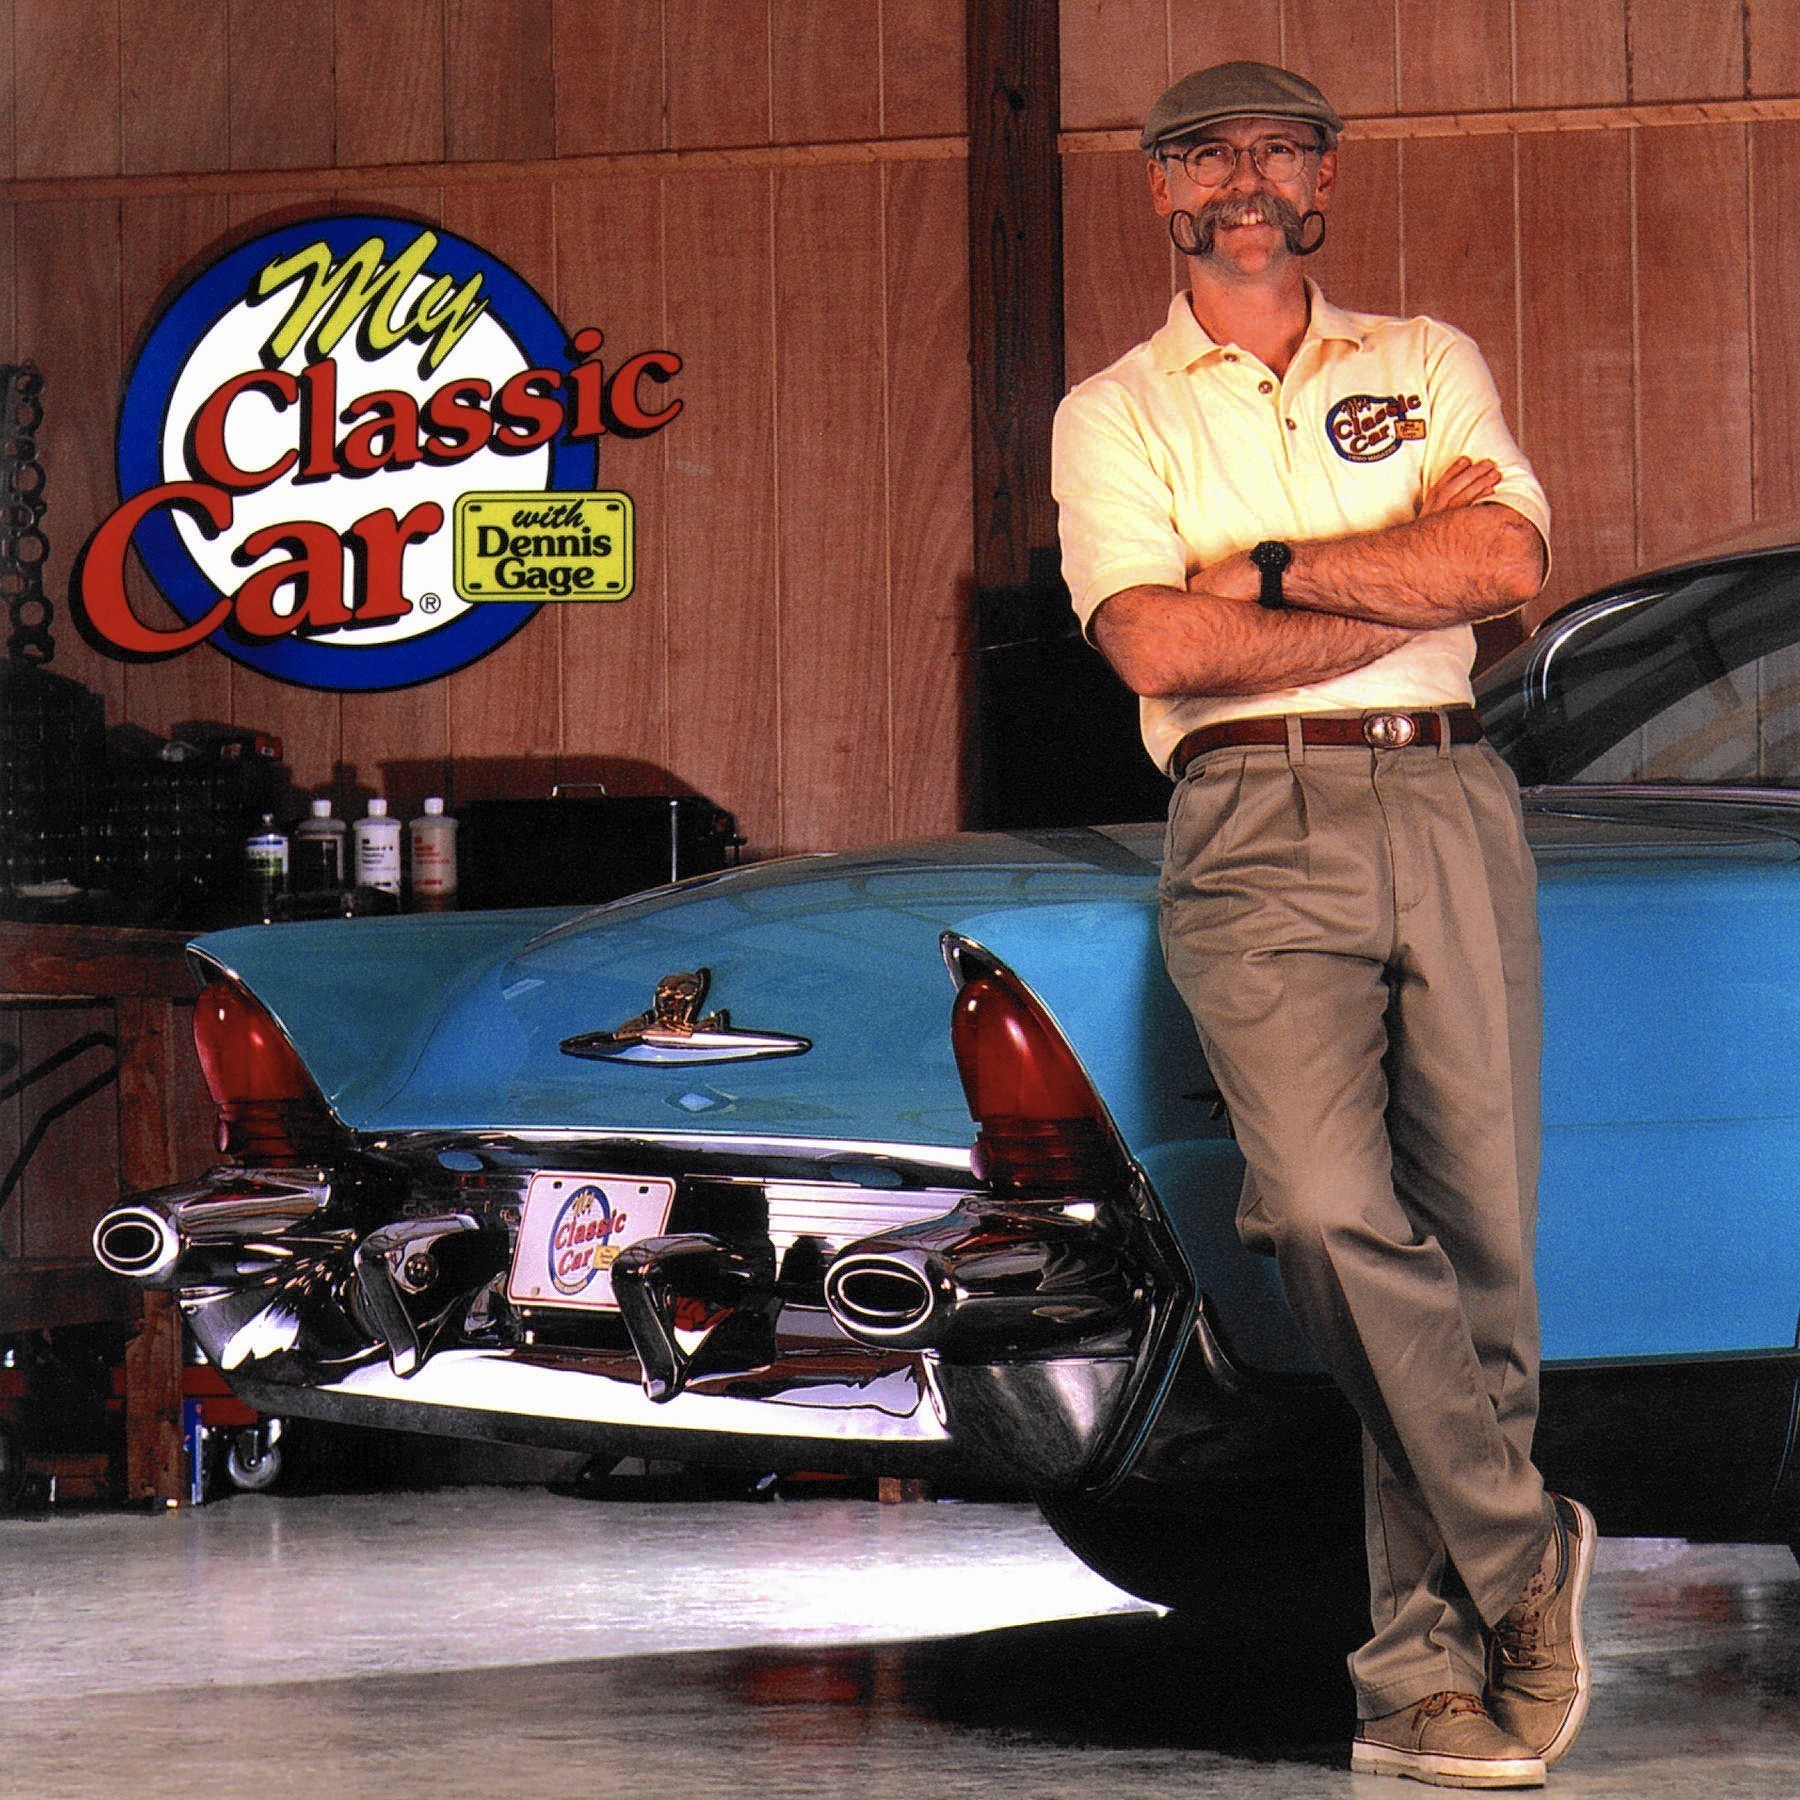 'My Classic Car' host Dennis Gage, coming to Wheels of Time in Macungie